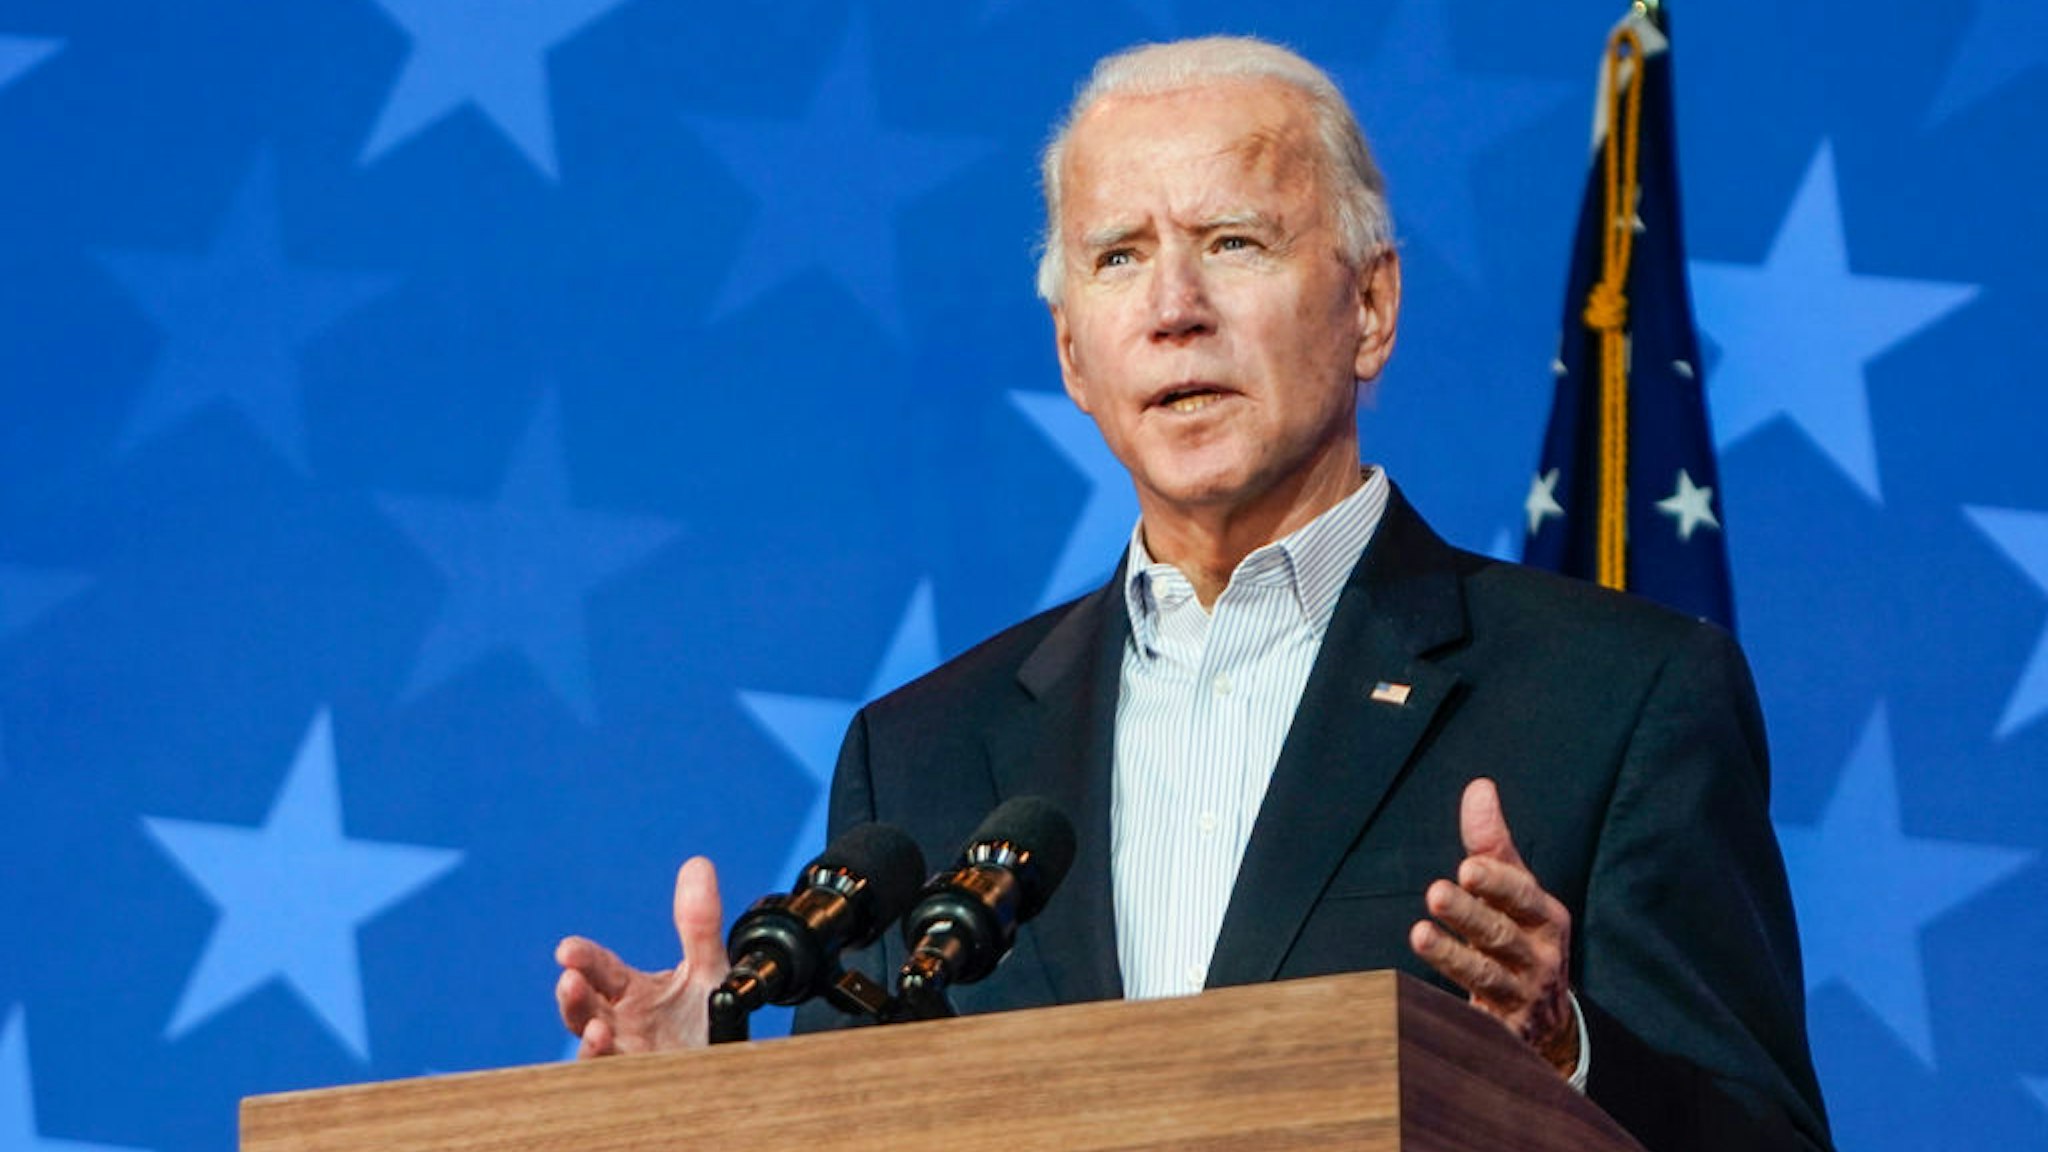 Former Vice President and presidential nominee Joe Biden addresses reporters on November 5, 2020 in Wilmington, Delaware. (Photo by Demetrius Freeman/The Washington Post via Getty Images)